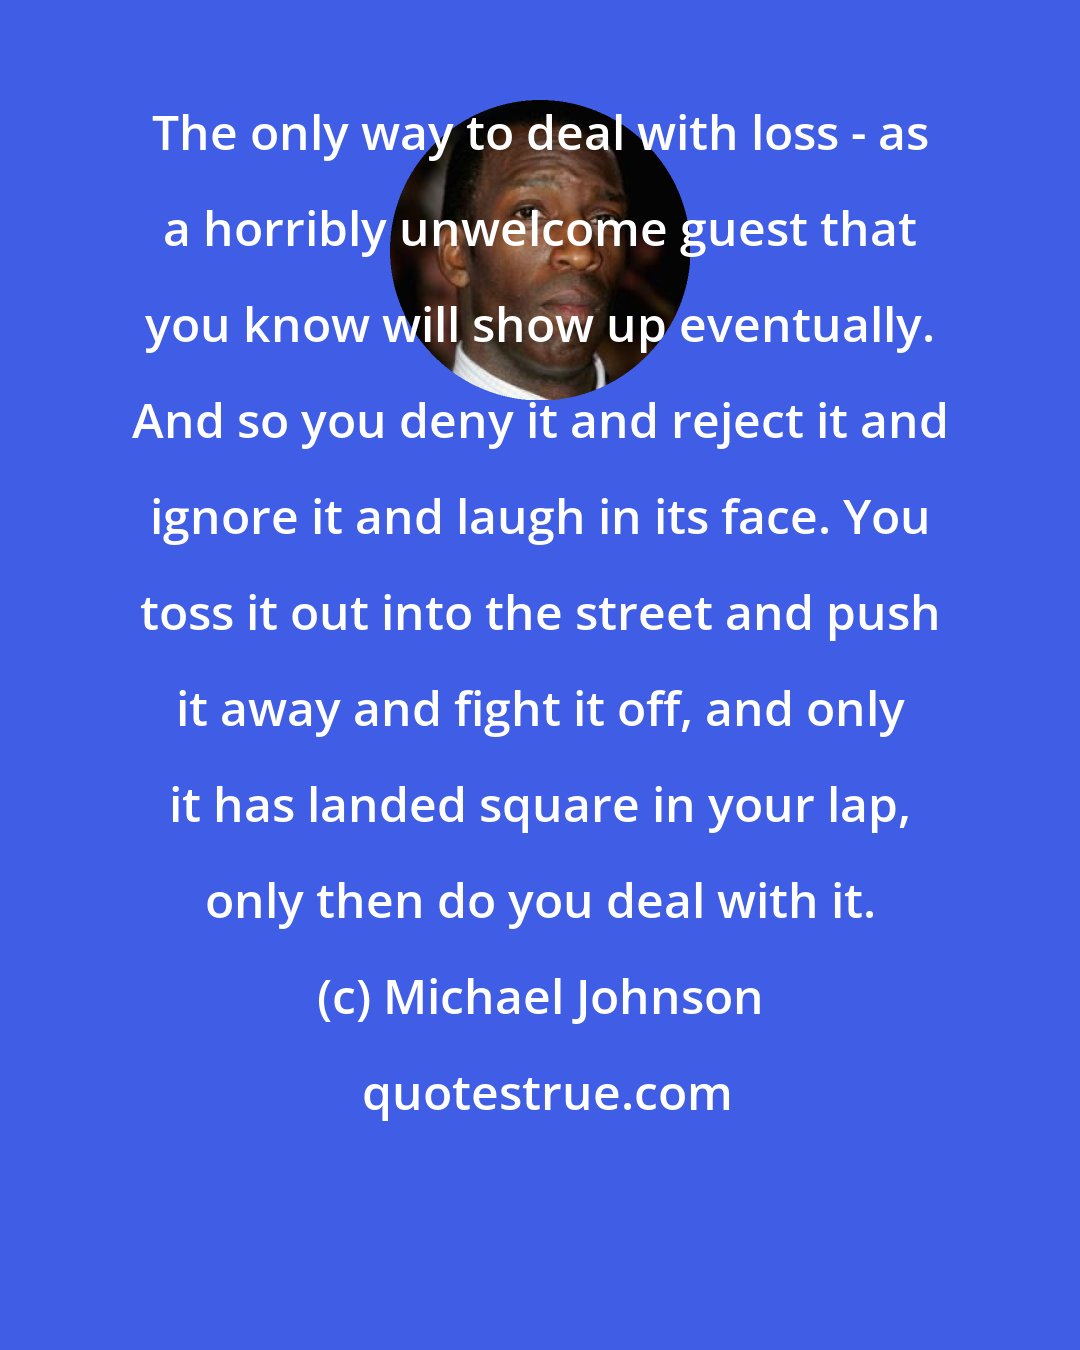 Michael Johnson: The only way to deal with loss - as a horribly unwelcome guest that you know will show up eventually. And so you deny it and reject it and ignore it and laugh in its face. You toss it out into the street and push it away and fight it off, and only it has landed square in your lap, only then do you deal with it.